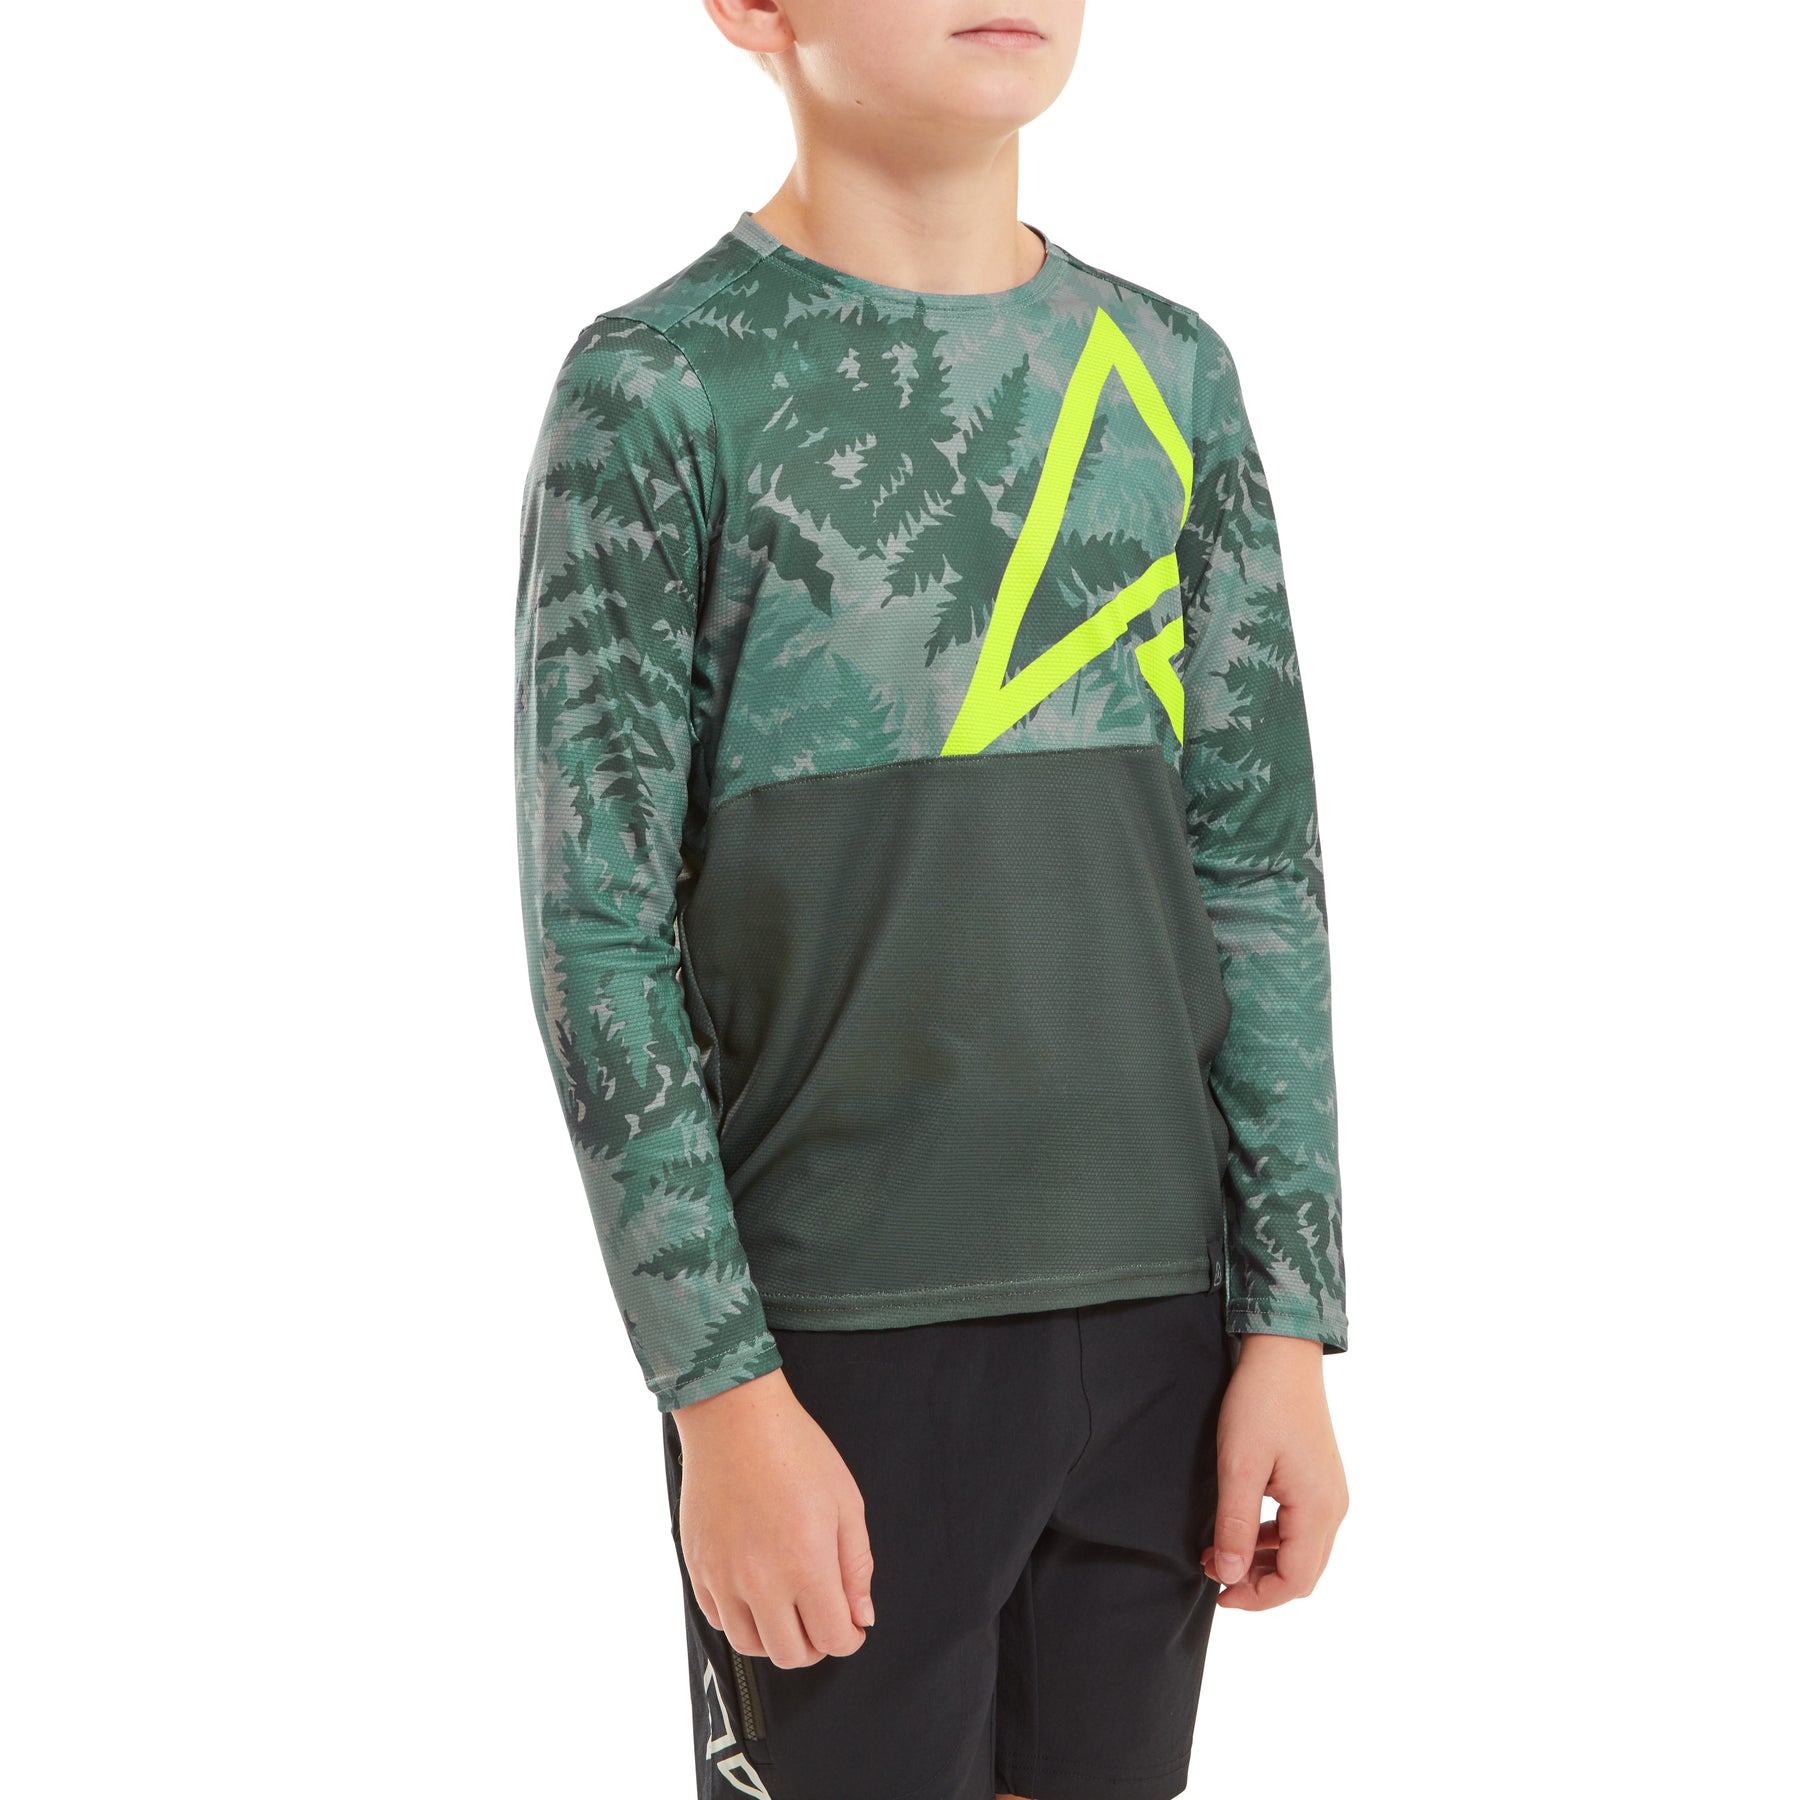 Altura Spark Light Weight Kids Long Sleeve Jersey Olive 9-10 YEARS